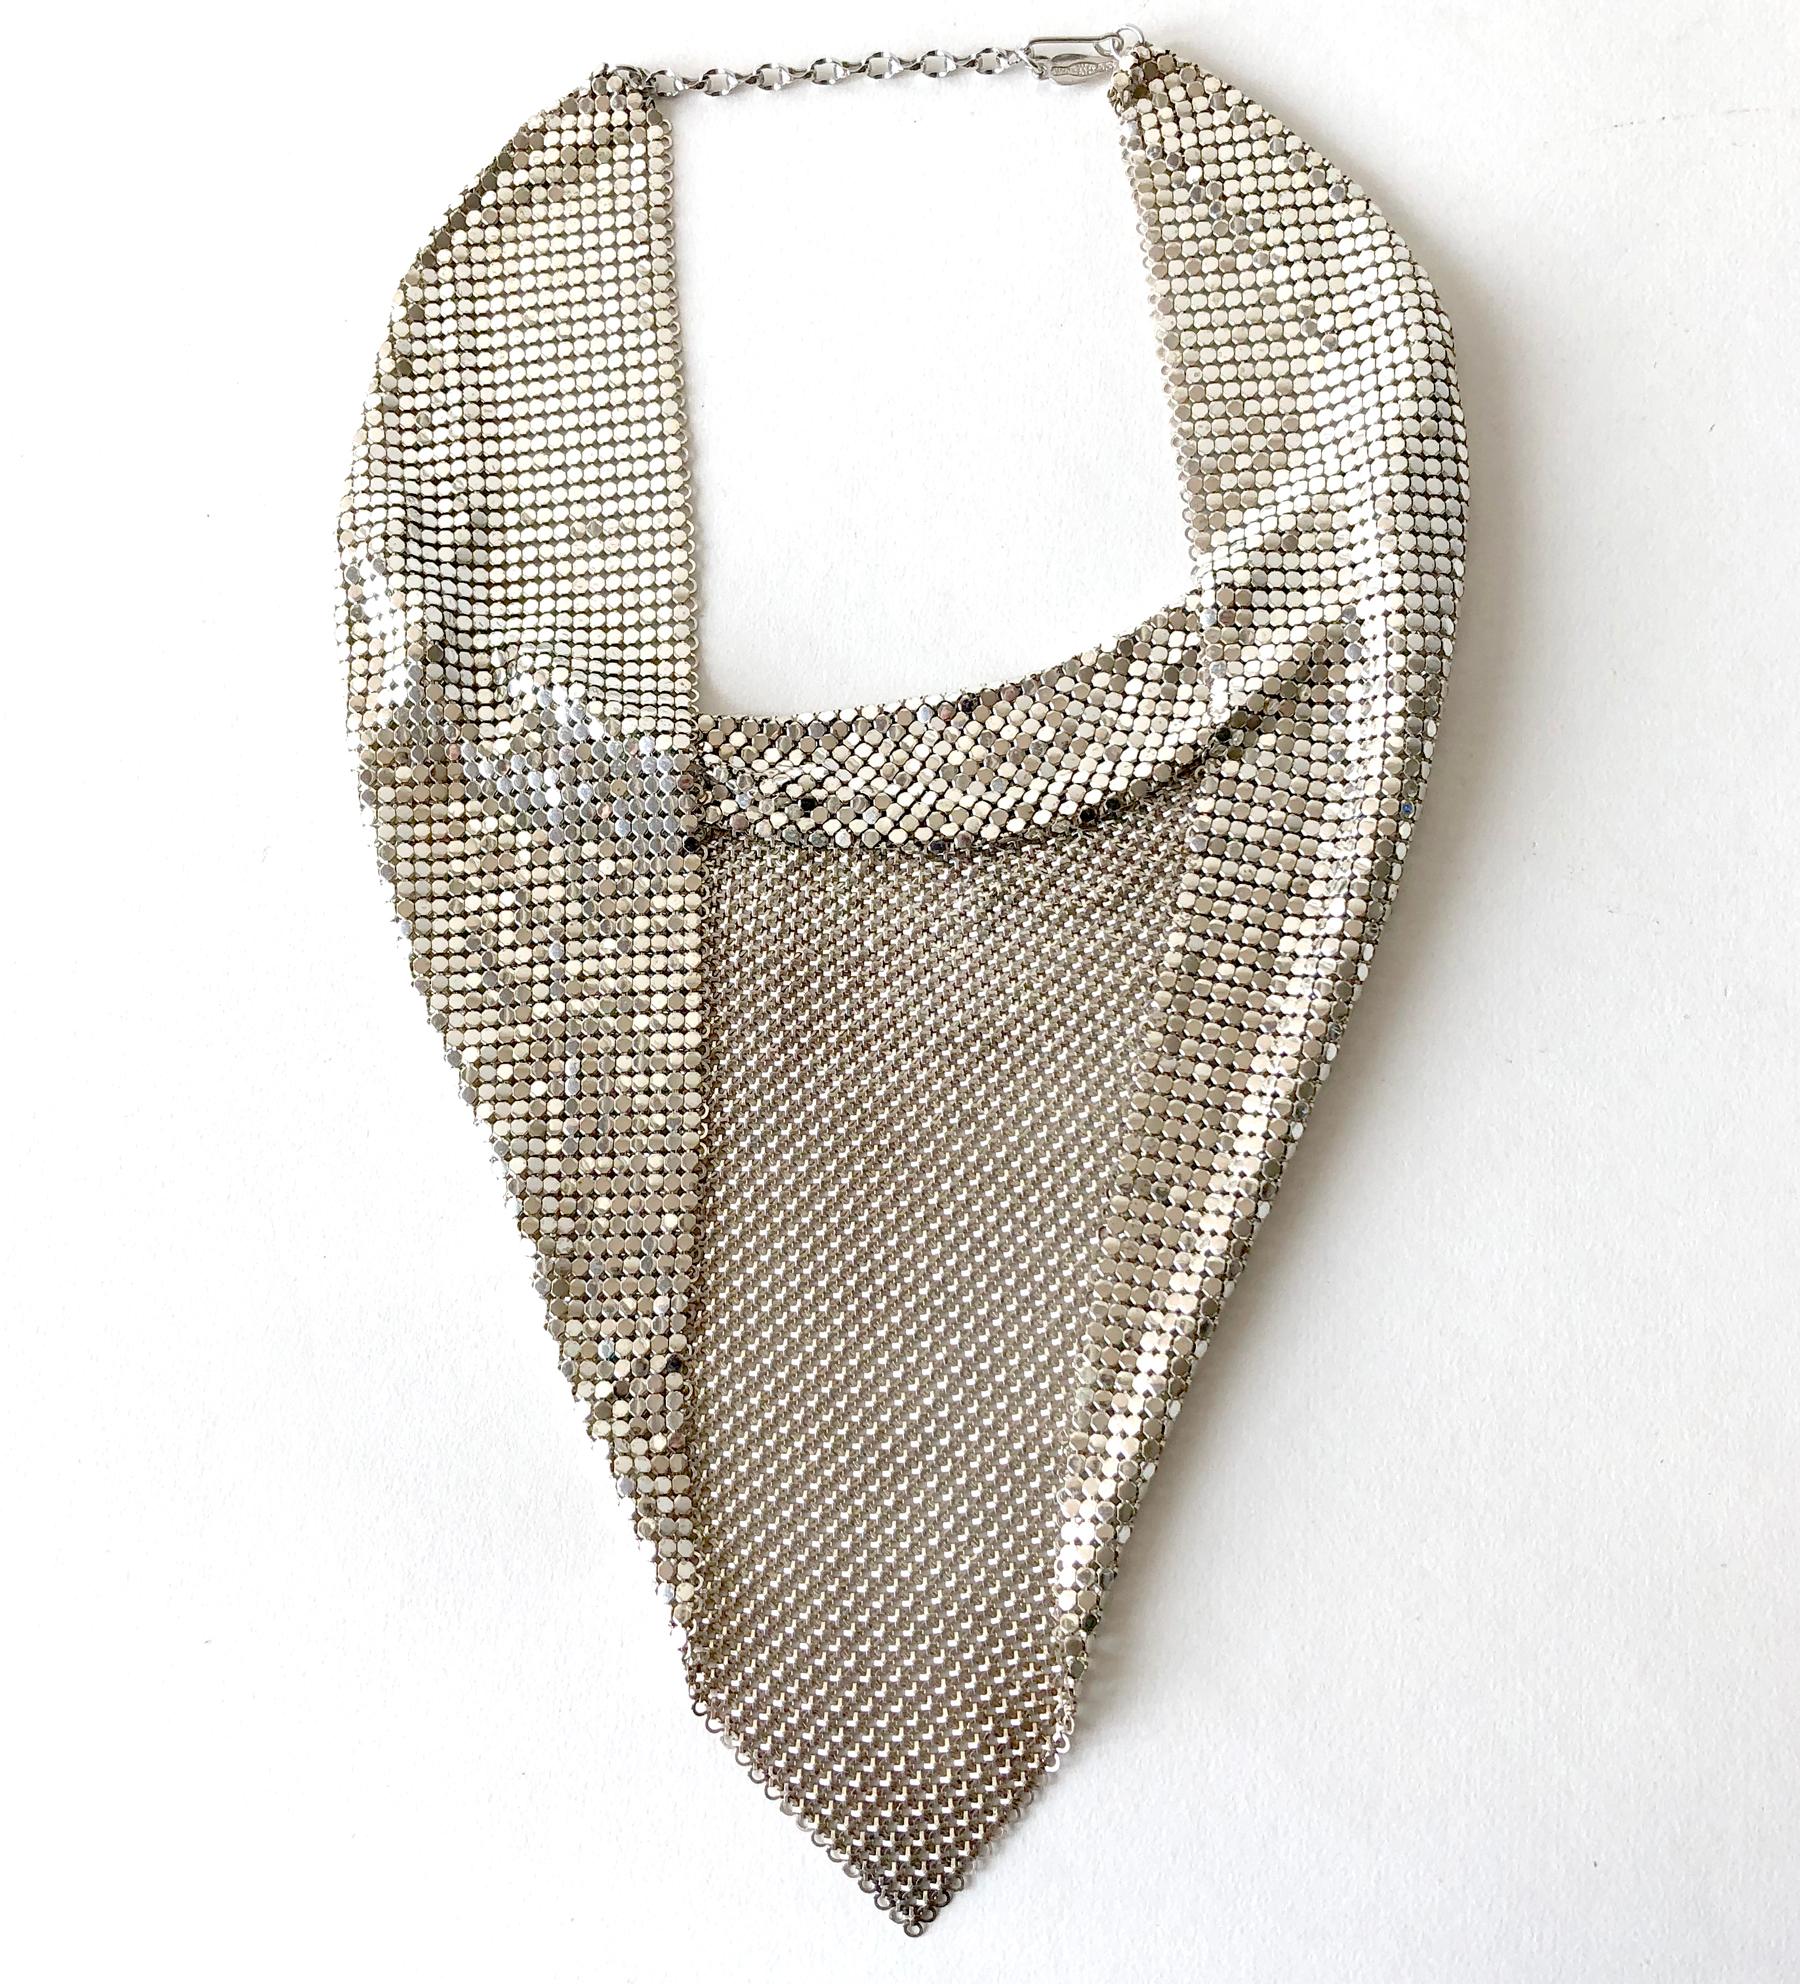 Vintage Whiting & Davis silver tone metal mesh scarf necklace, circa 1970's.  Necklace triangle measures 12